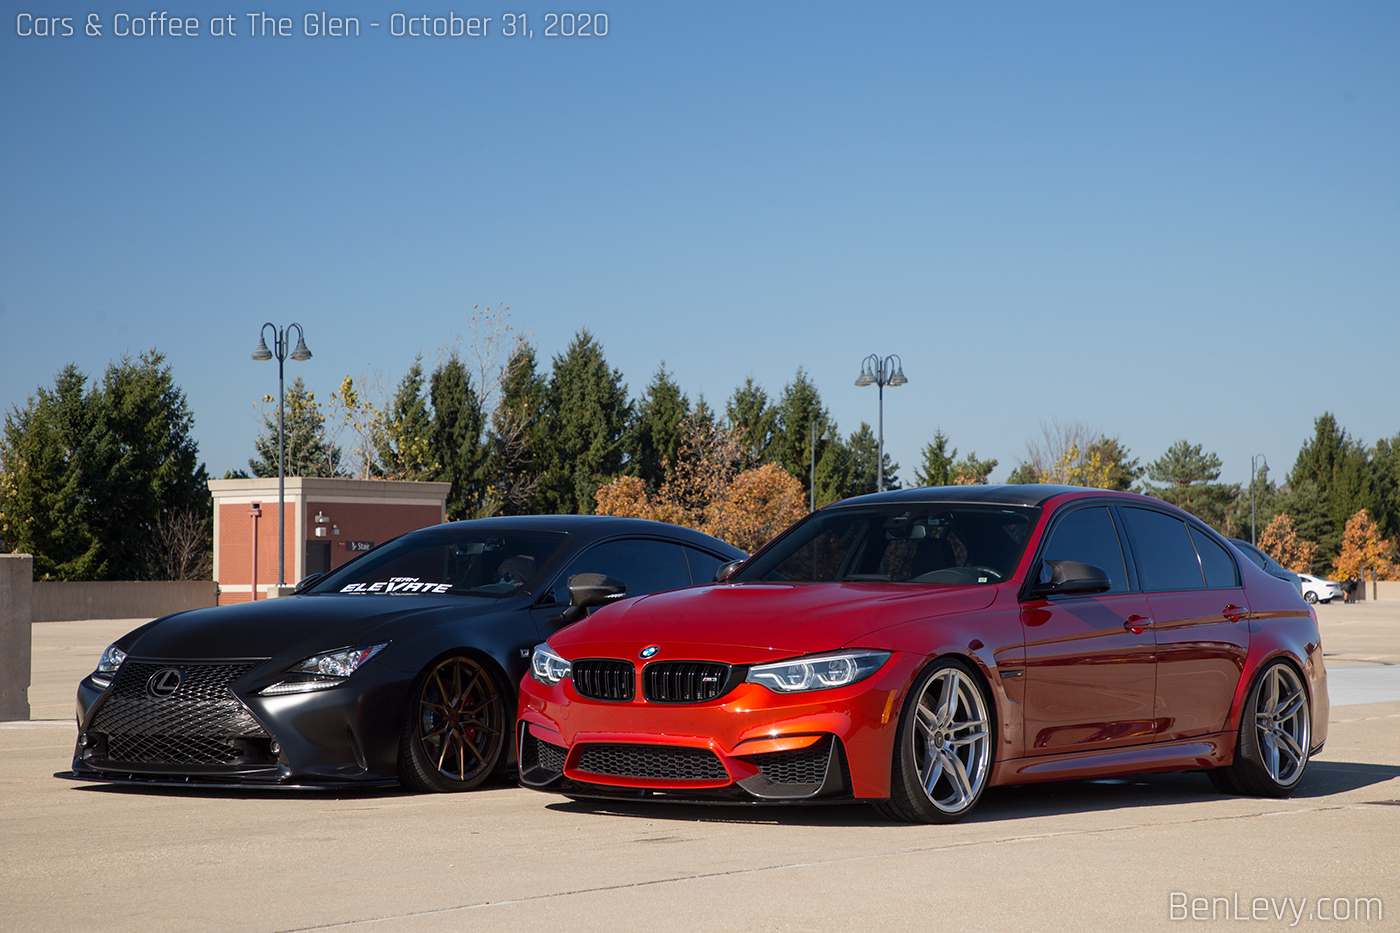 Lexus RC350 and BMW M3